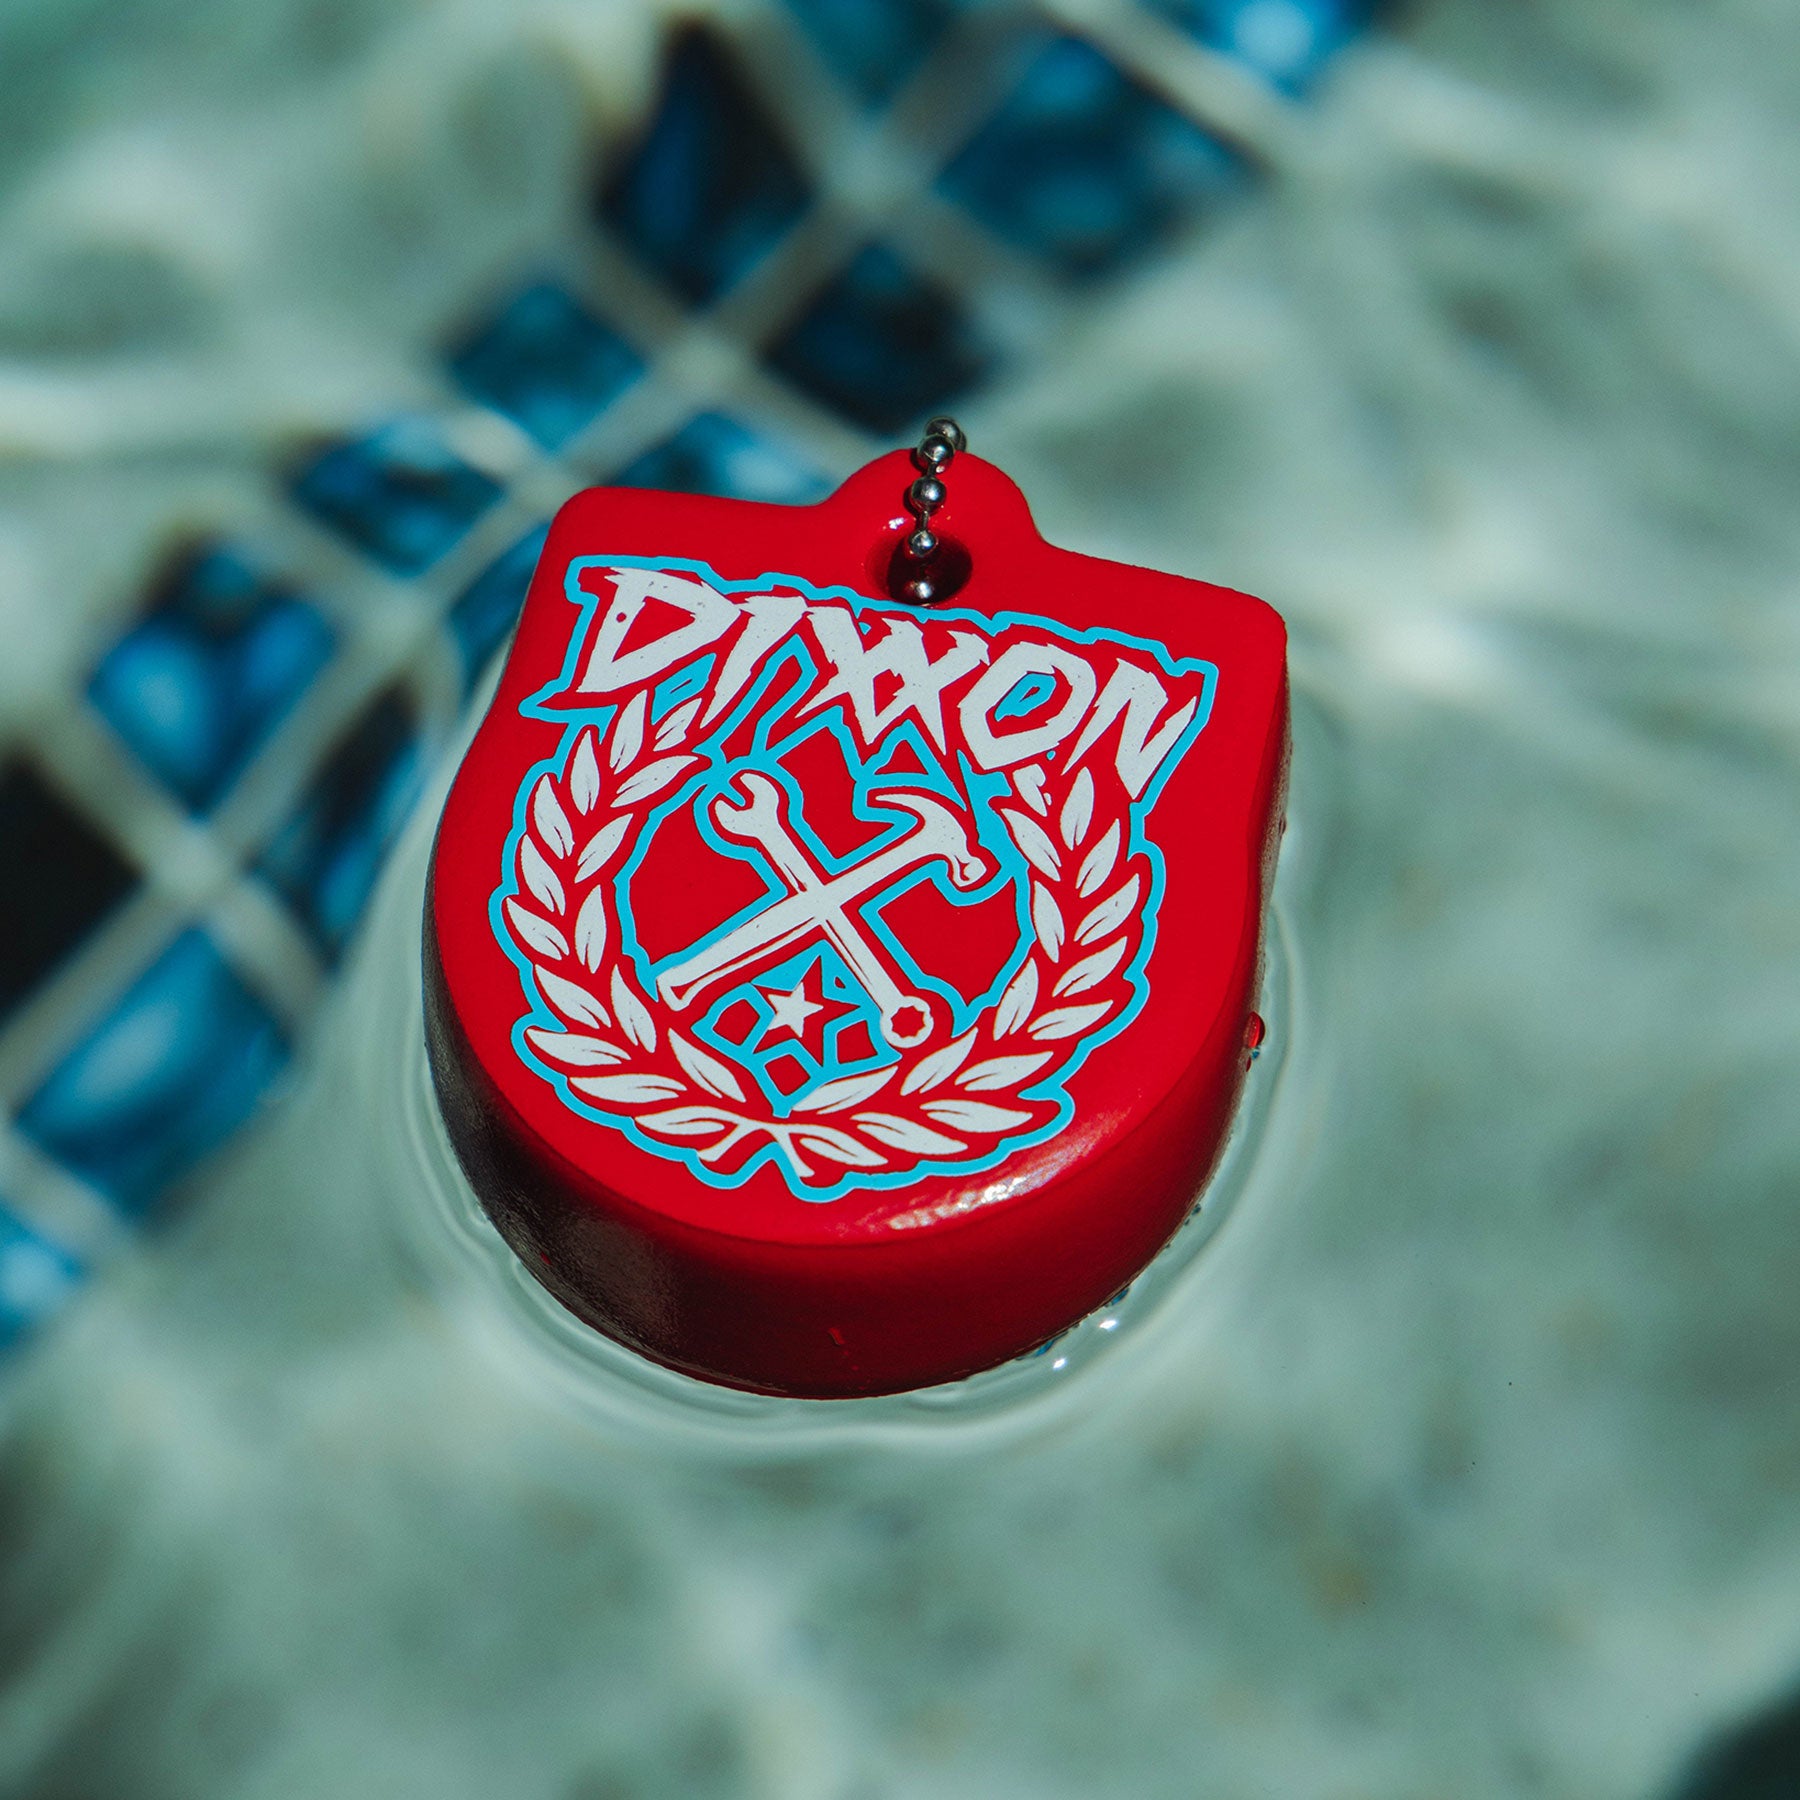 Salty Crest Floating Keychain - Red, White, & Blue - Dixxon Flannel Co.